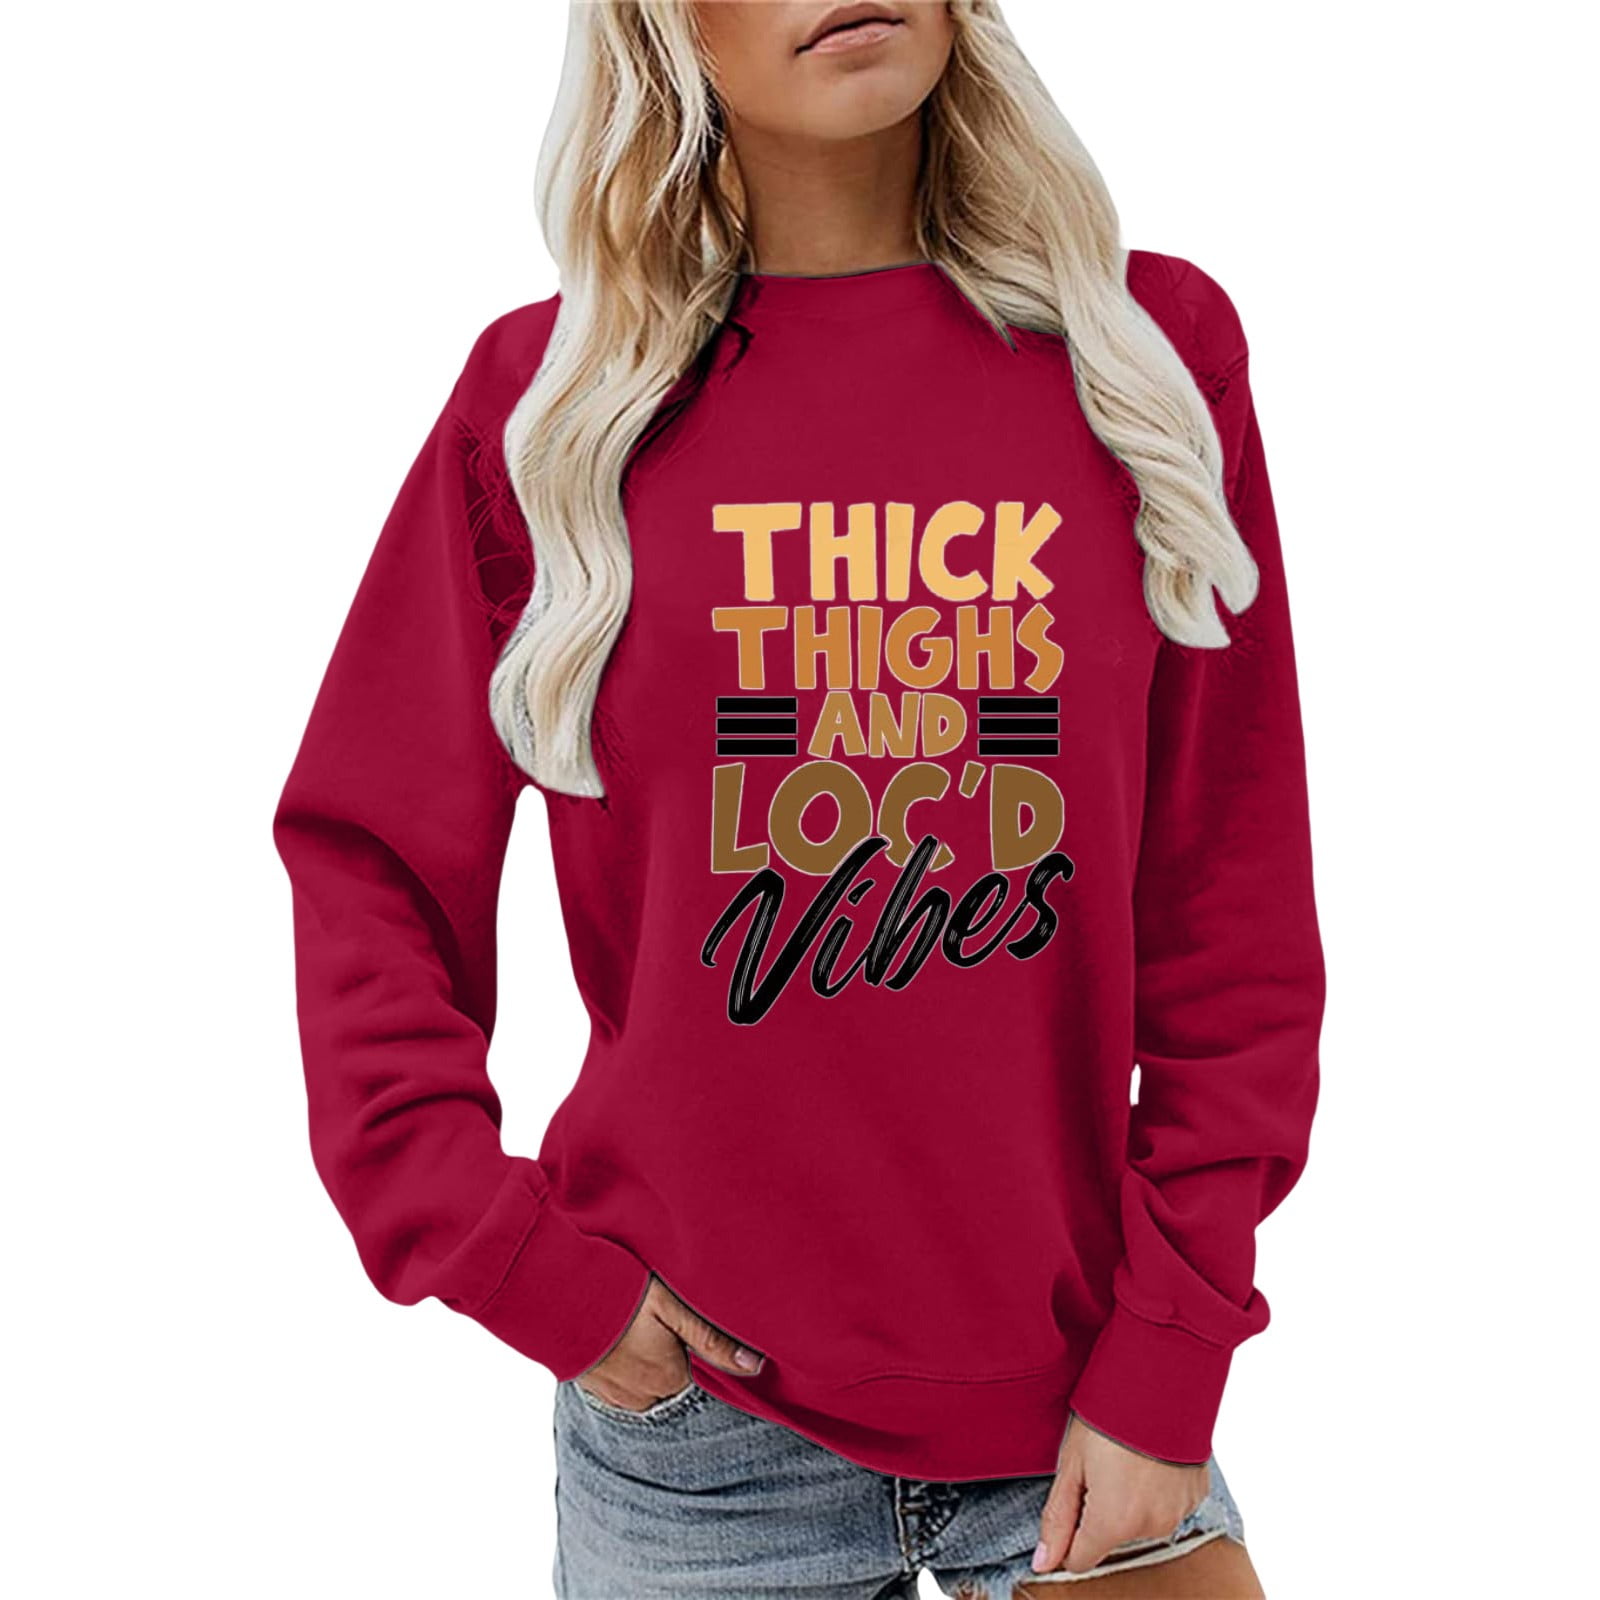 Lined Hoodie Women Pullover Thick Thighs And Loc'd T Shirts Black Pride  Shirt Tee Tops Sweater Petite Women Quotes Sweatshirts 